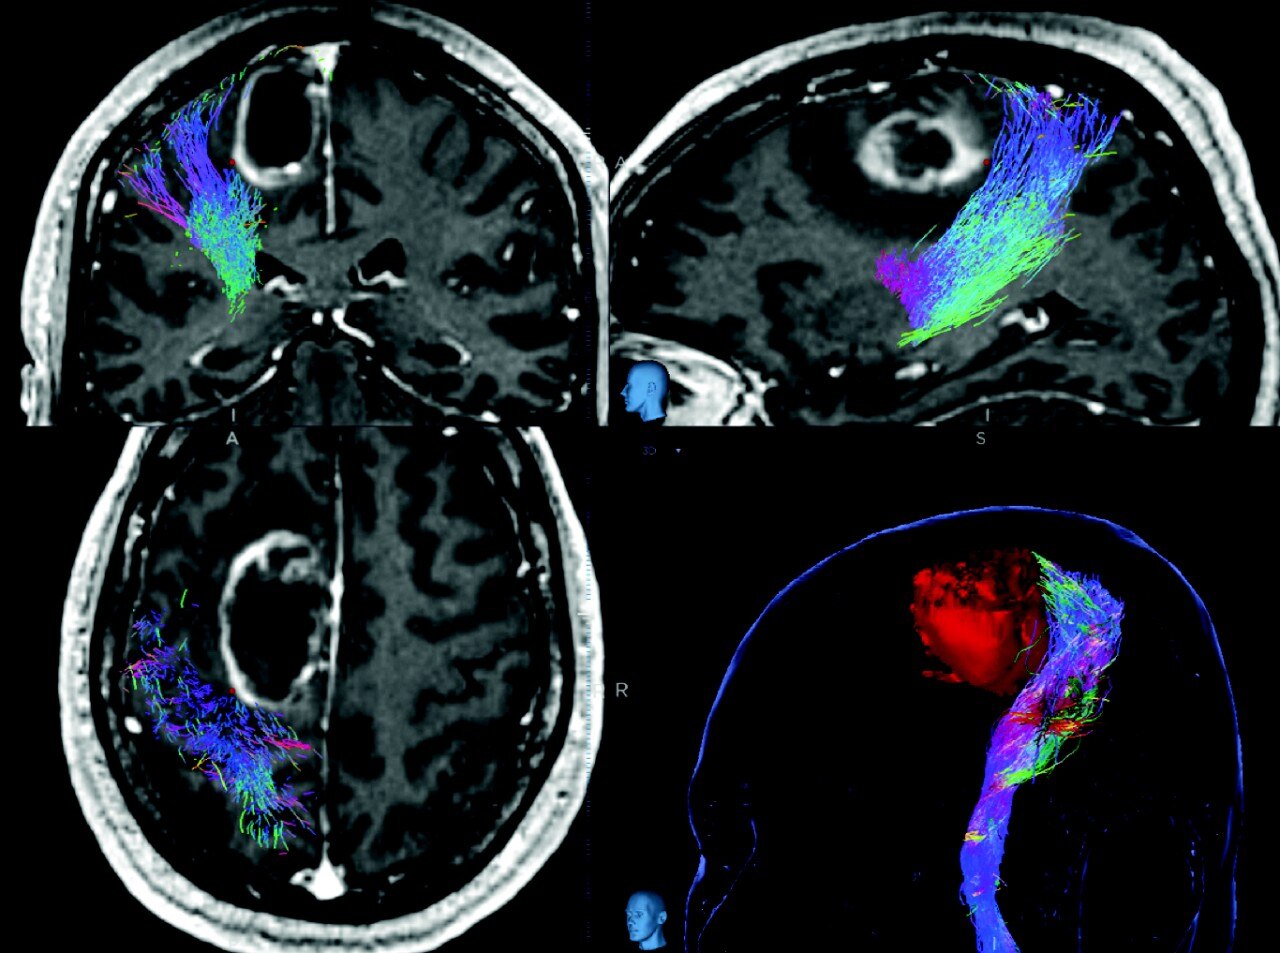 Visualization of brain fibers with CSD imaging